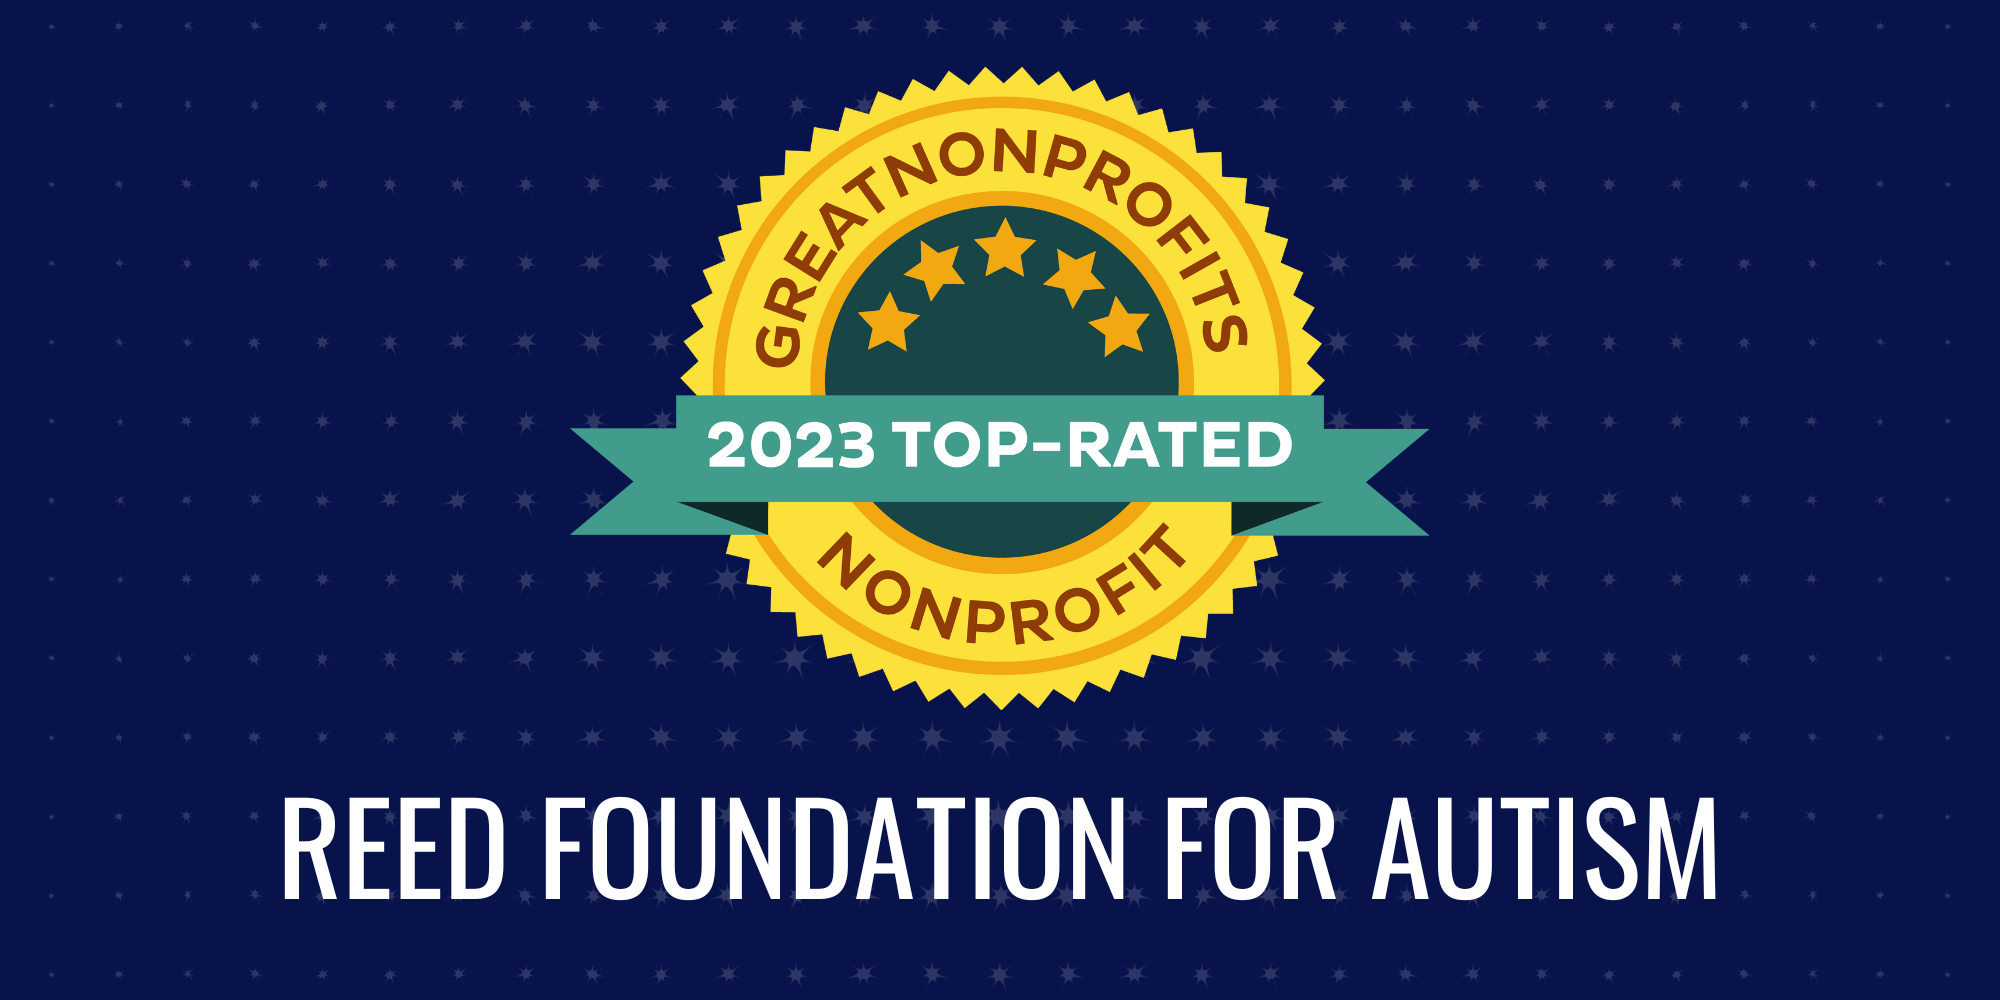 GreatNonprofits.org: What Your Nonprofit Needs to Know